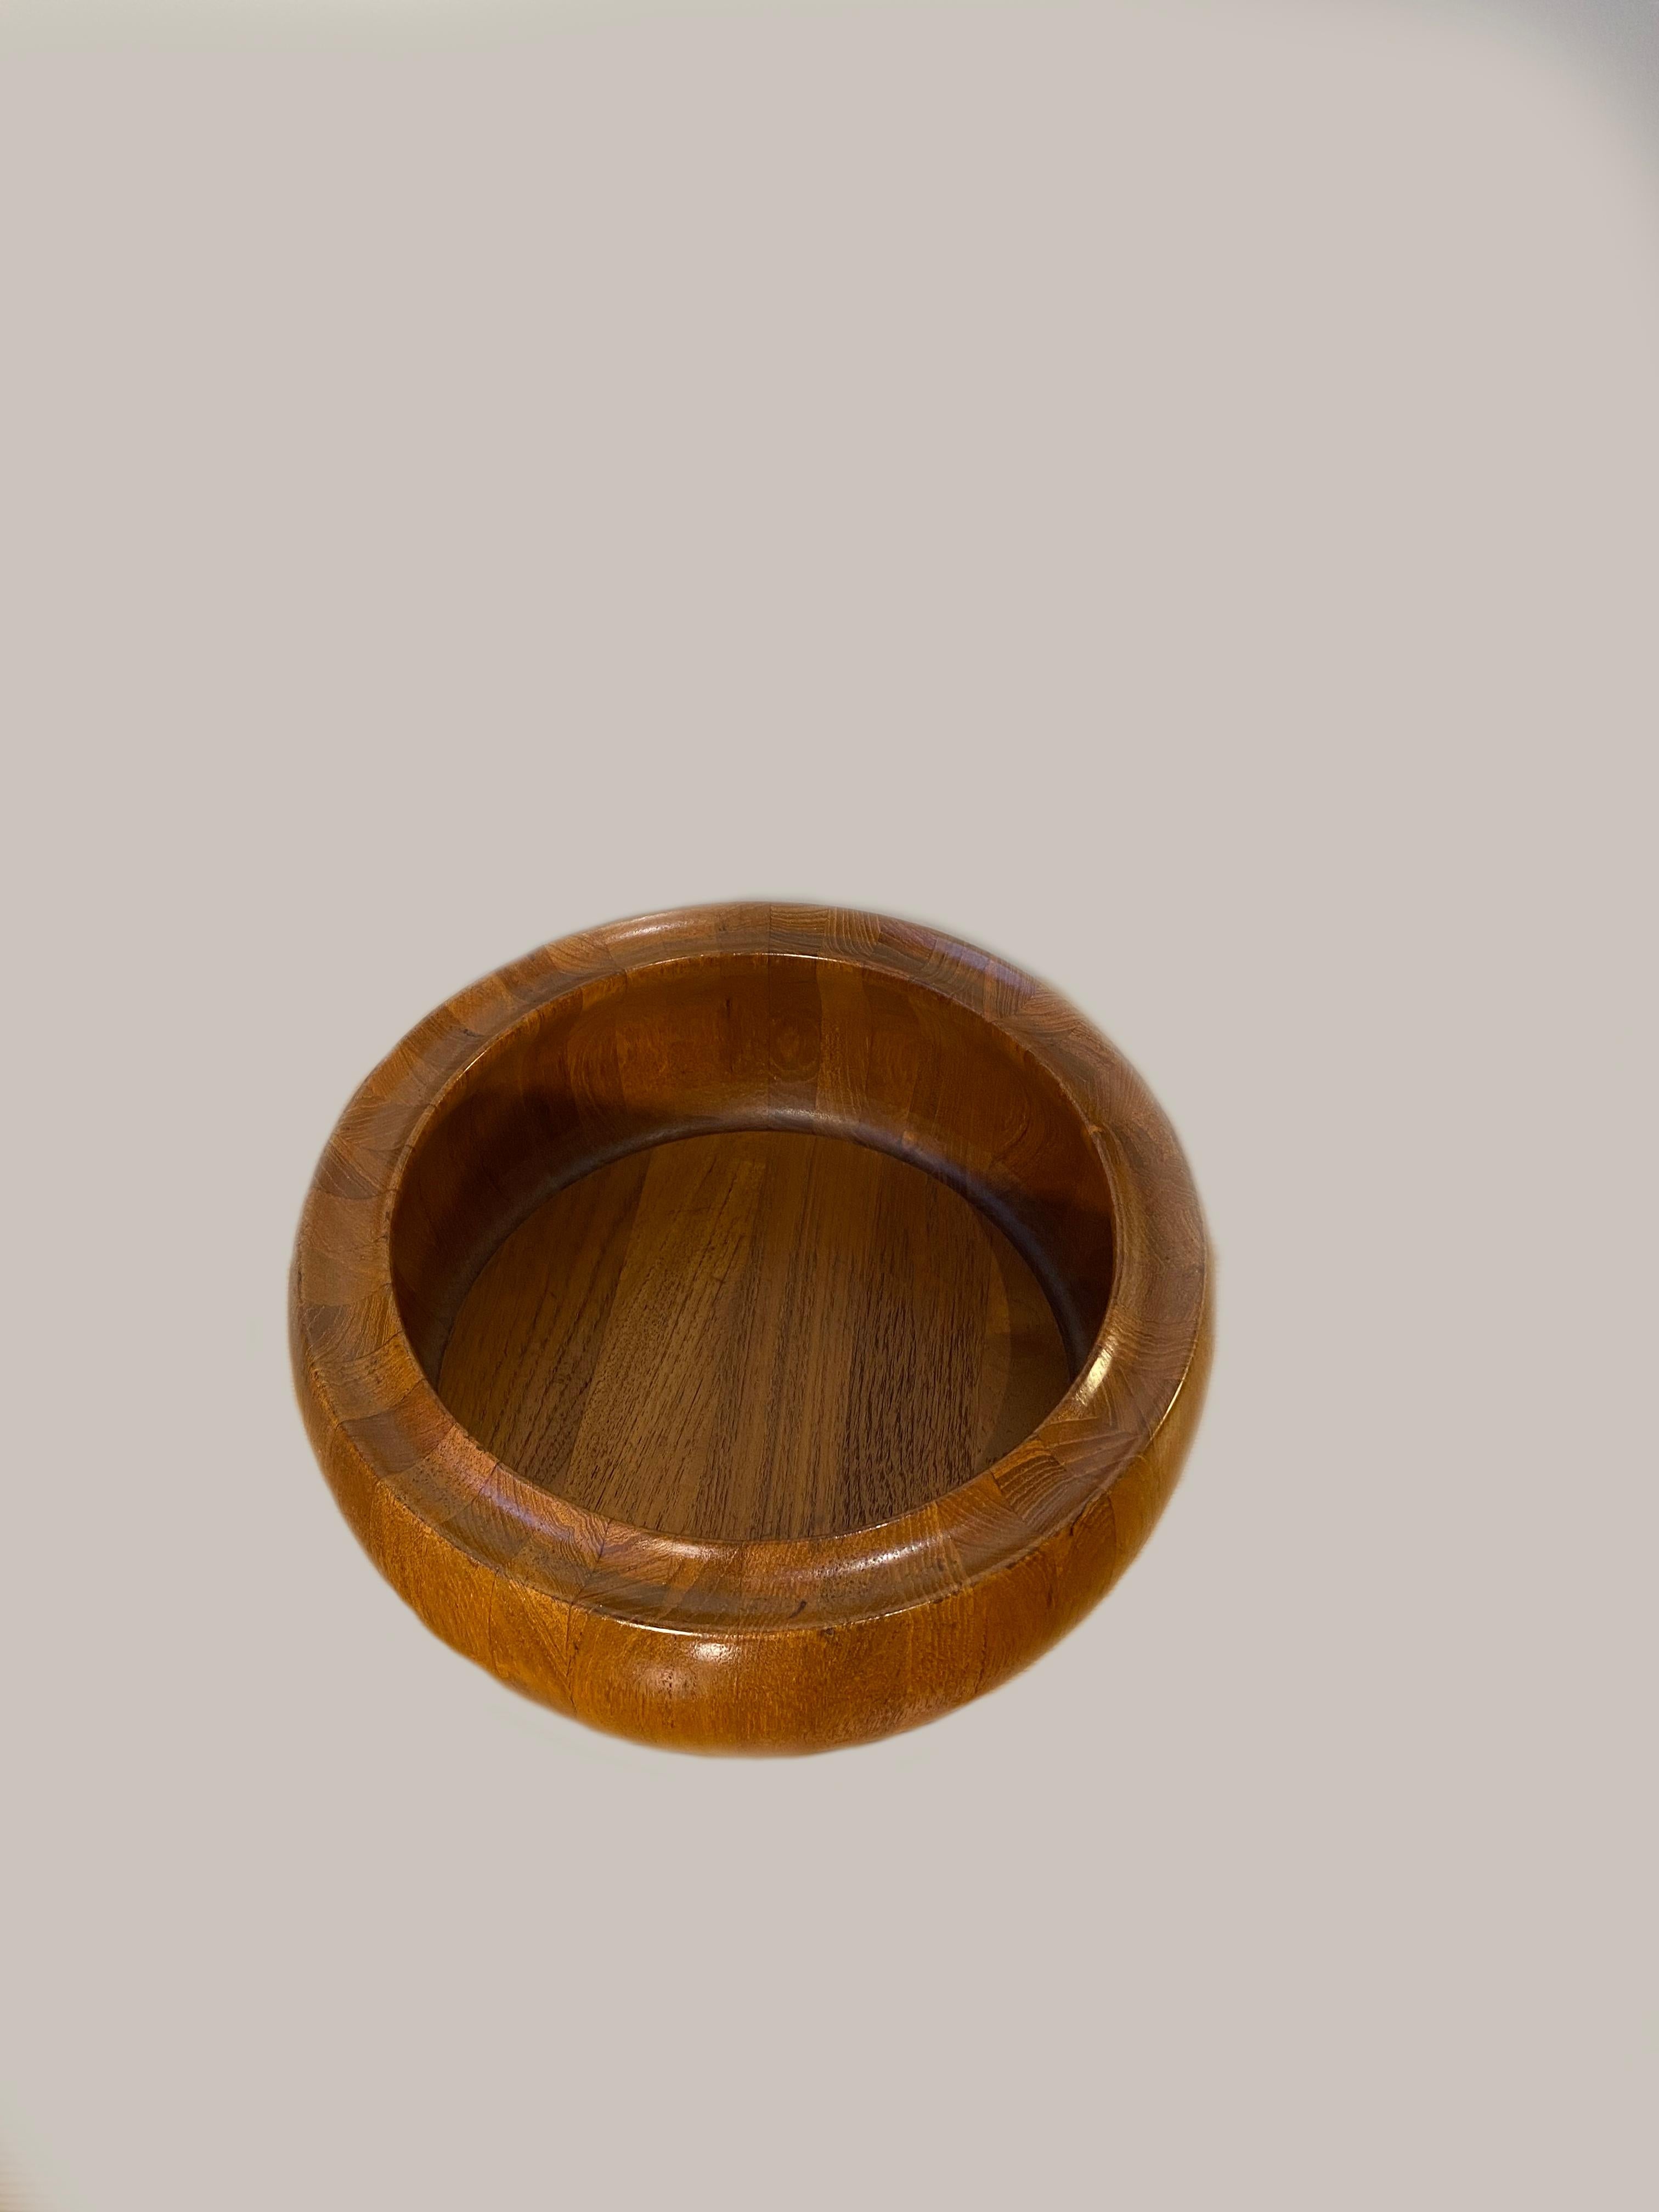 Fruit bowl in teak from the 1960s, designed and produced by the Danish tableware company Digsmed, 25 x 11 cm, very beautiful shades of wood, can also serve as a decorative bowl or Vide-Poche.